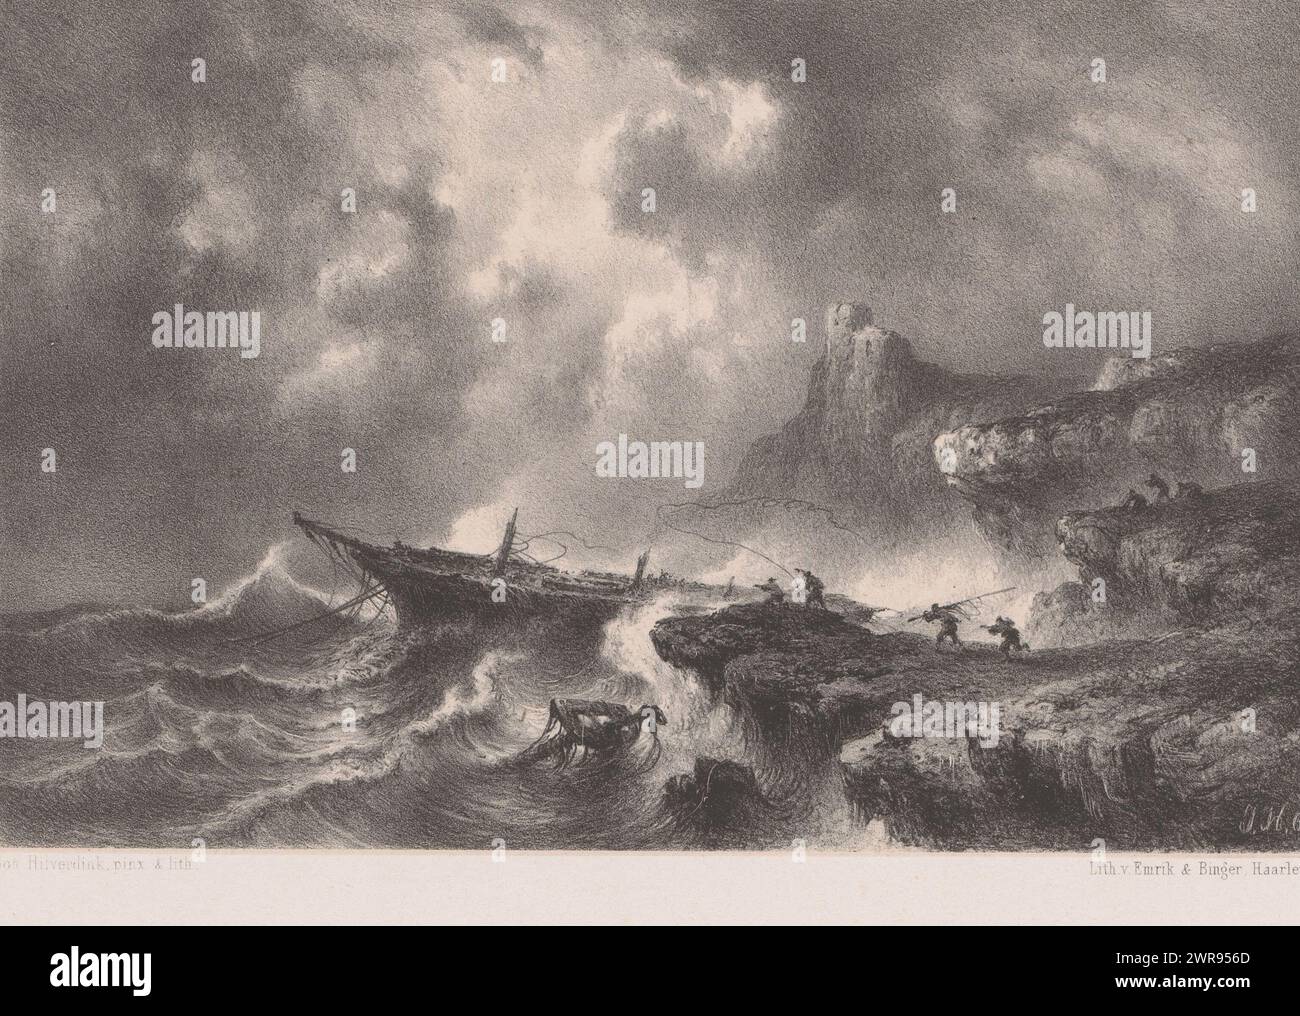 Ship in distress during a storm at sea, the masts of the boat are broken off. From the rocky coast, figures try to tie the boat down with ropes., print maker: Johannes Hilverdink, after painting by: Johannes Hilverdink, printer: Emrik & Binger, Haarlem, 1861, paper, height 265 mm × width 360 mm, print Stock Photo